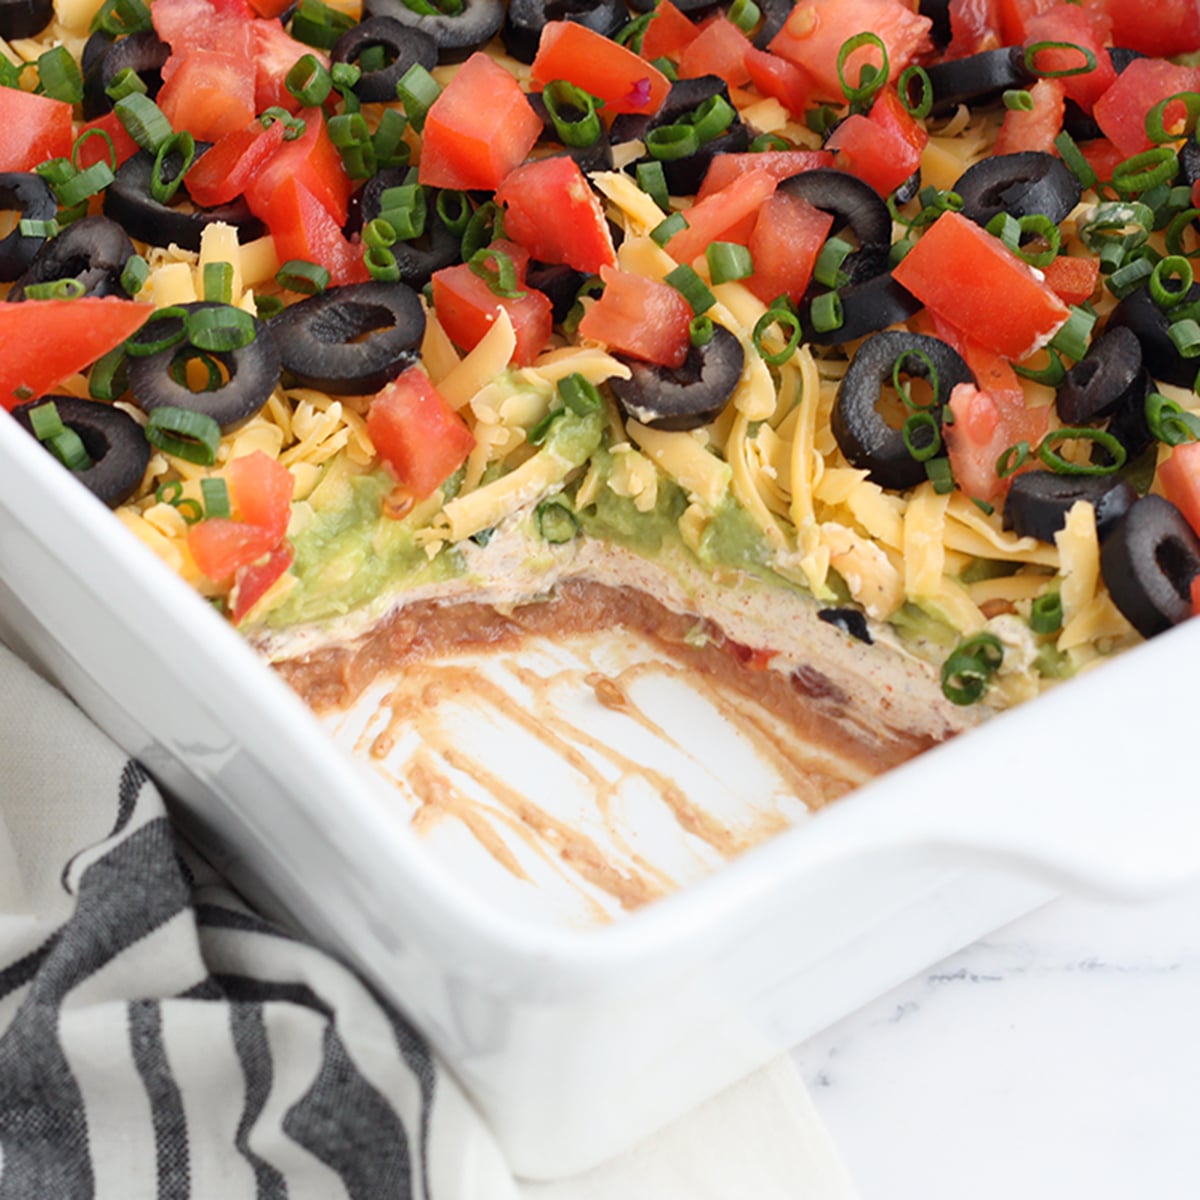 https://www.superhealthykids.com/wp-content/uploads/2022/06/7-layer-dip-featured-image-square-5.jpg